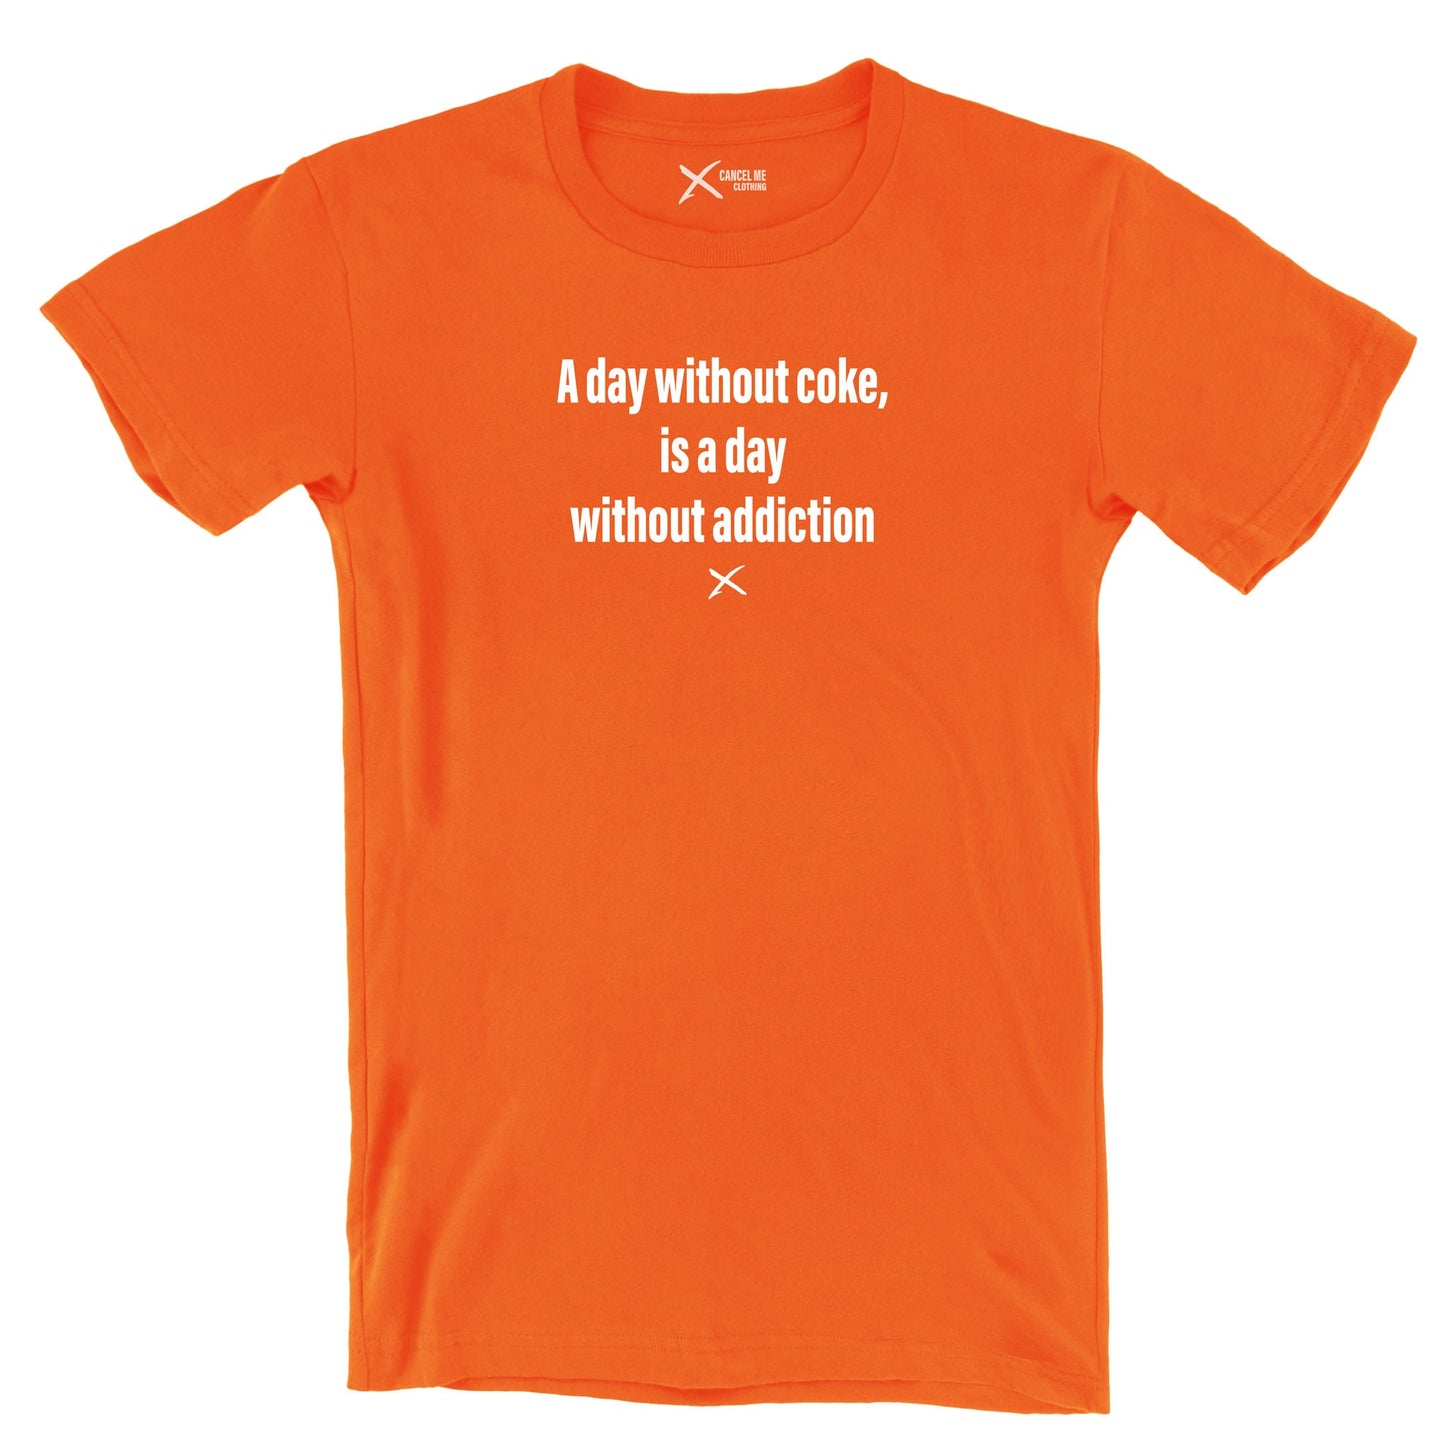 A day without coke, is a day without addiction - Shirt